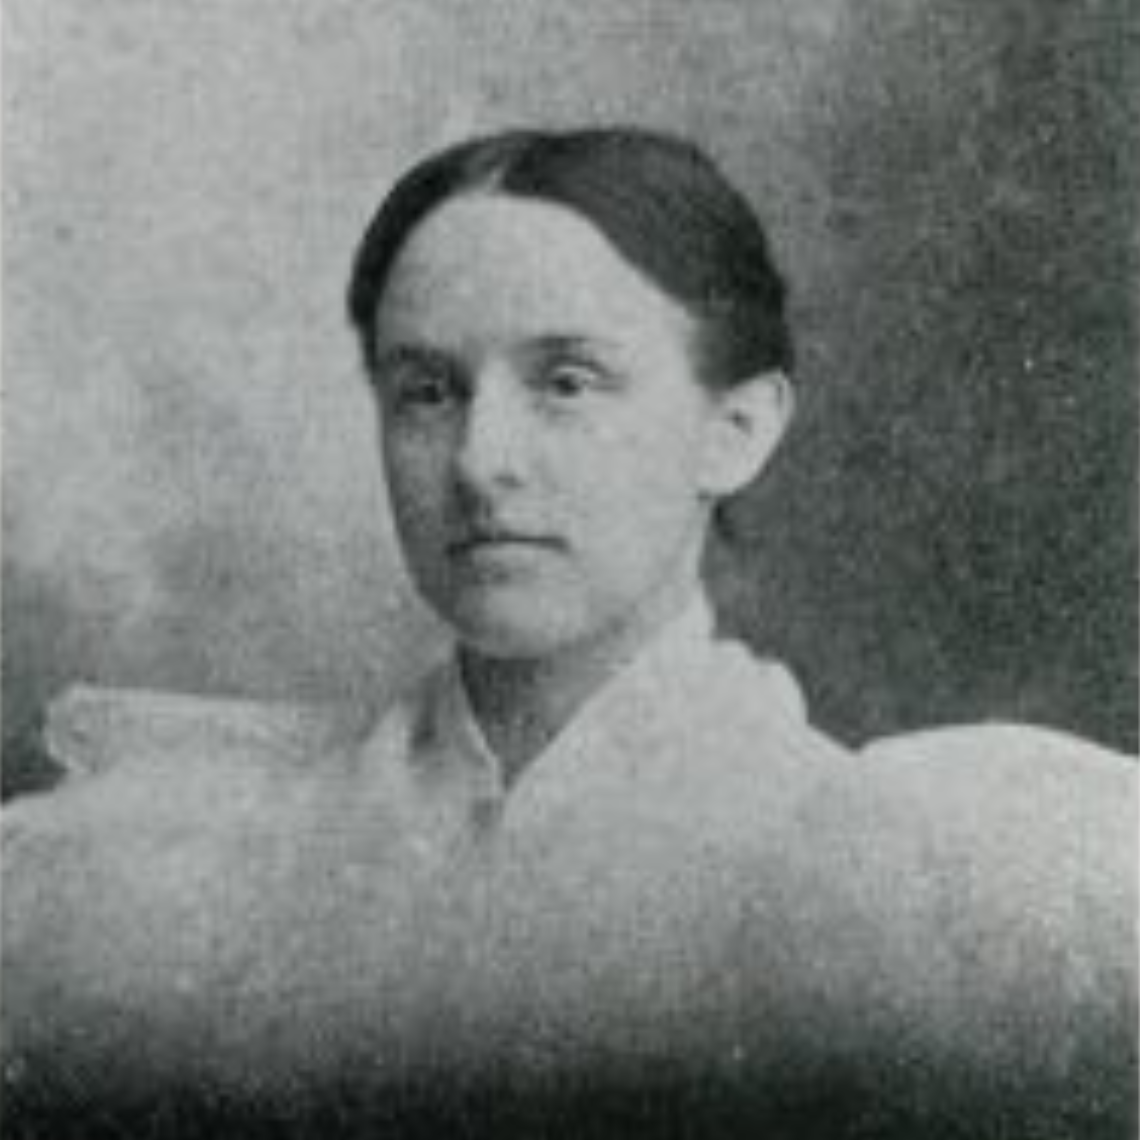 Portrait of Katherine Merrill as a young women wearing a white dress.